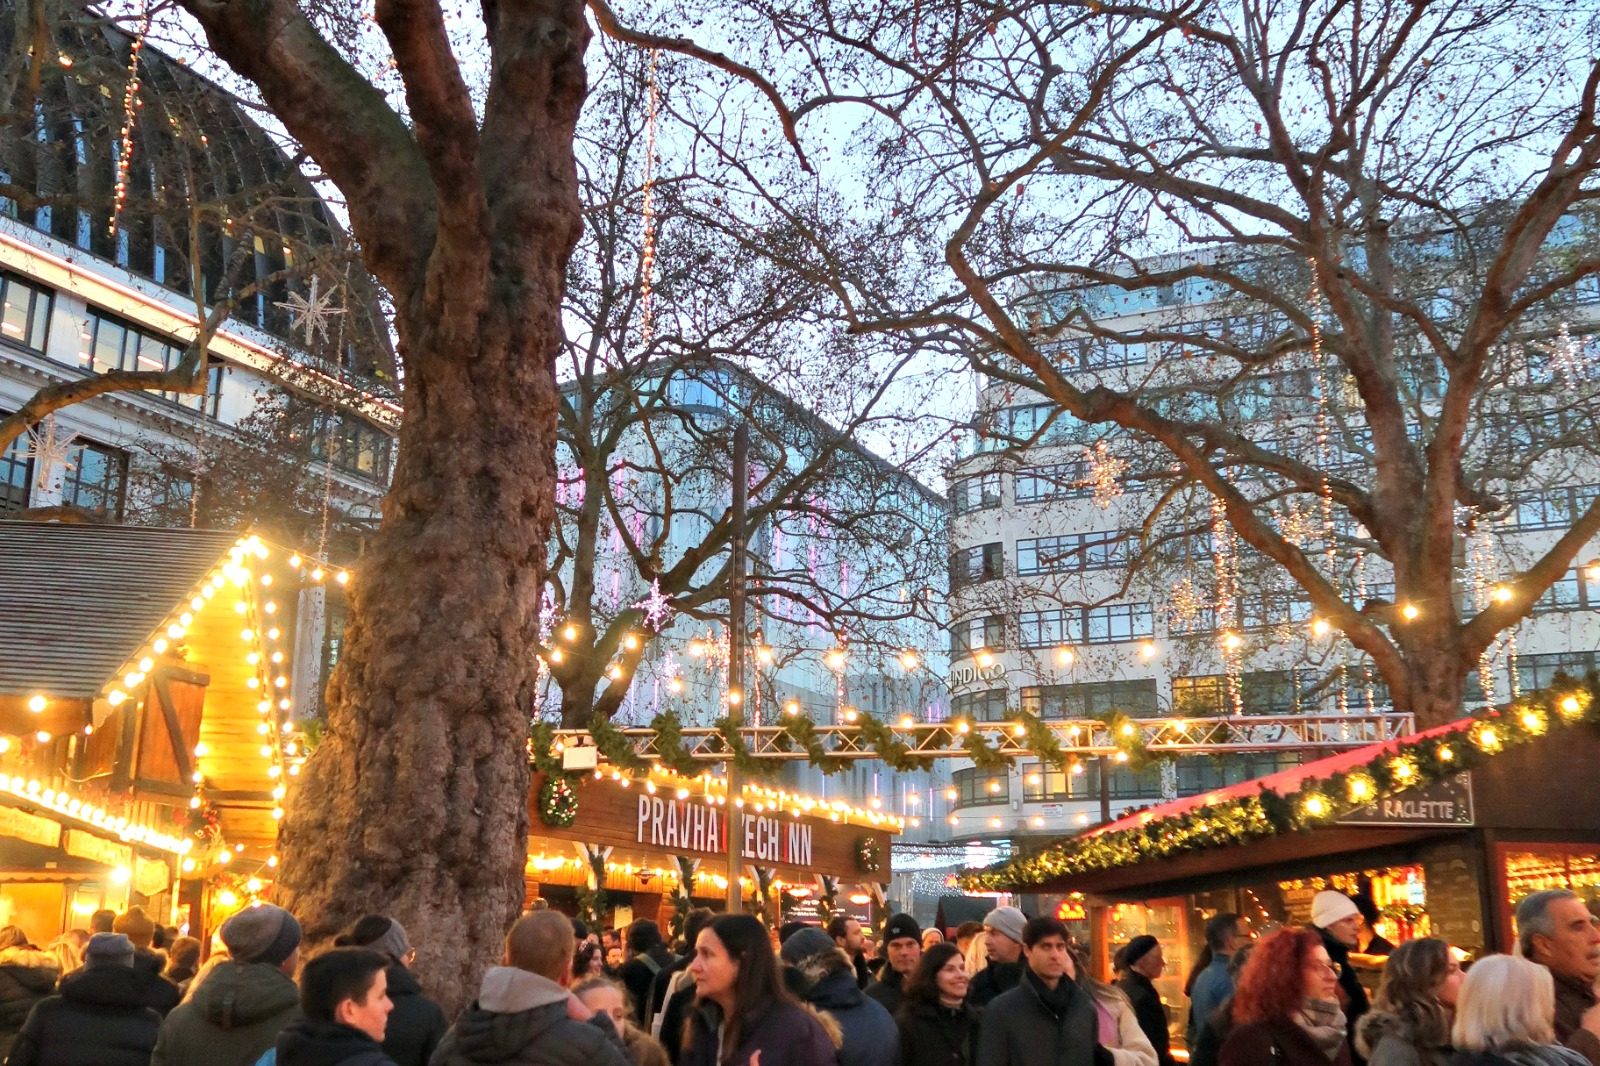 Leicester-Square-Christmas-market-at-night-